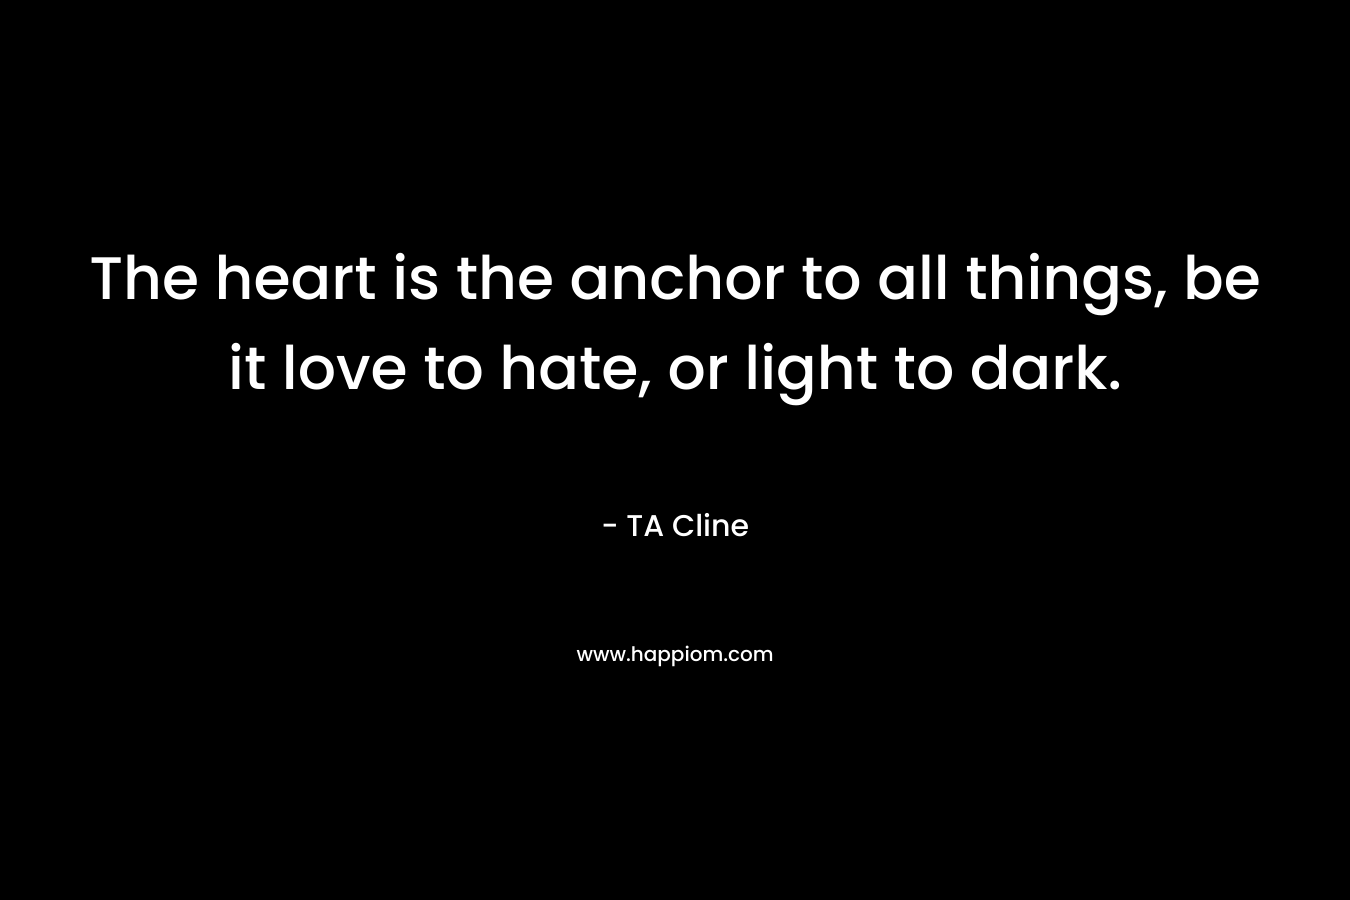 The heart is the anchor to all things, be it love to hate, or light to dark. – TA Cline